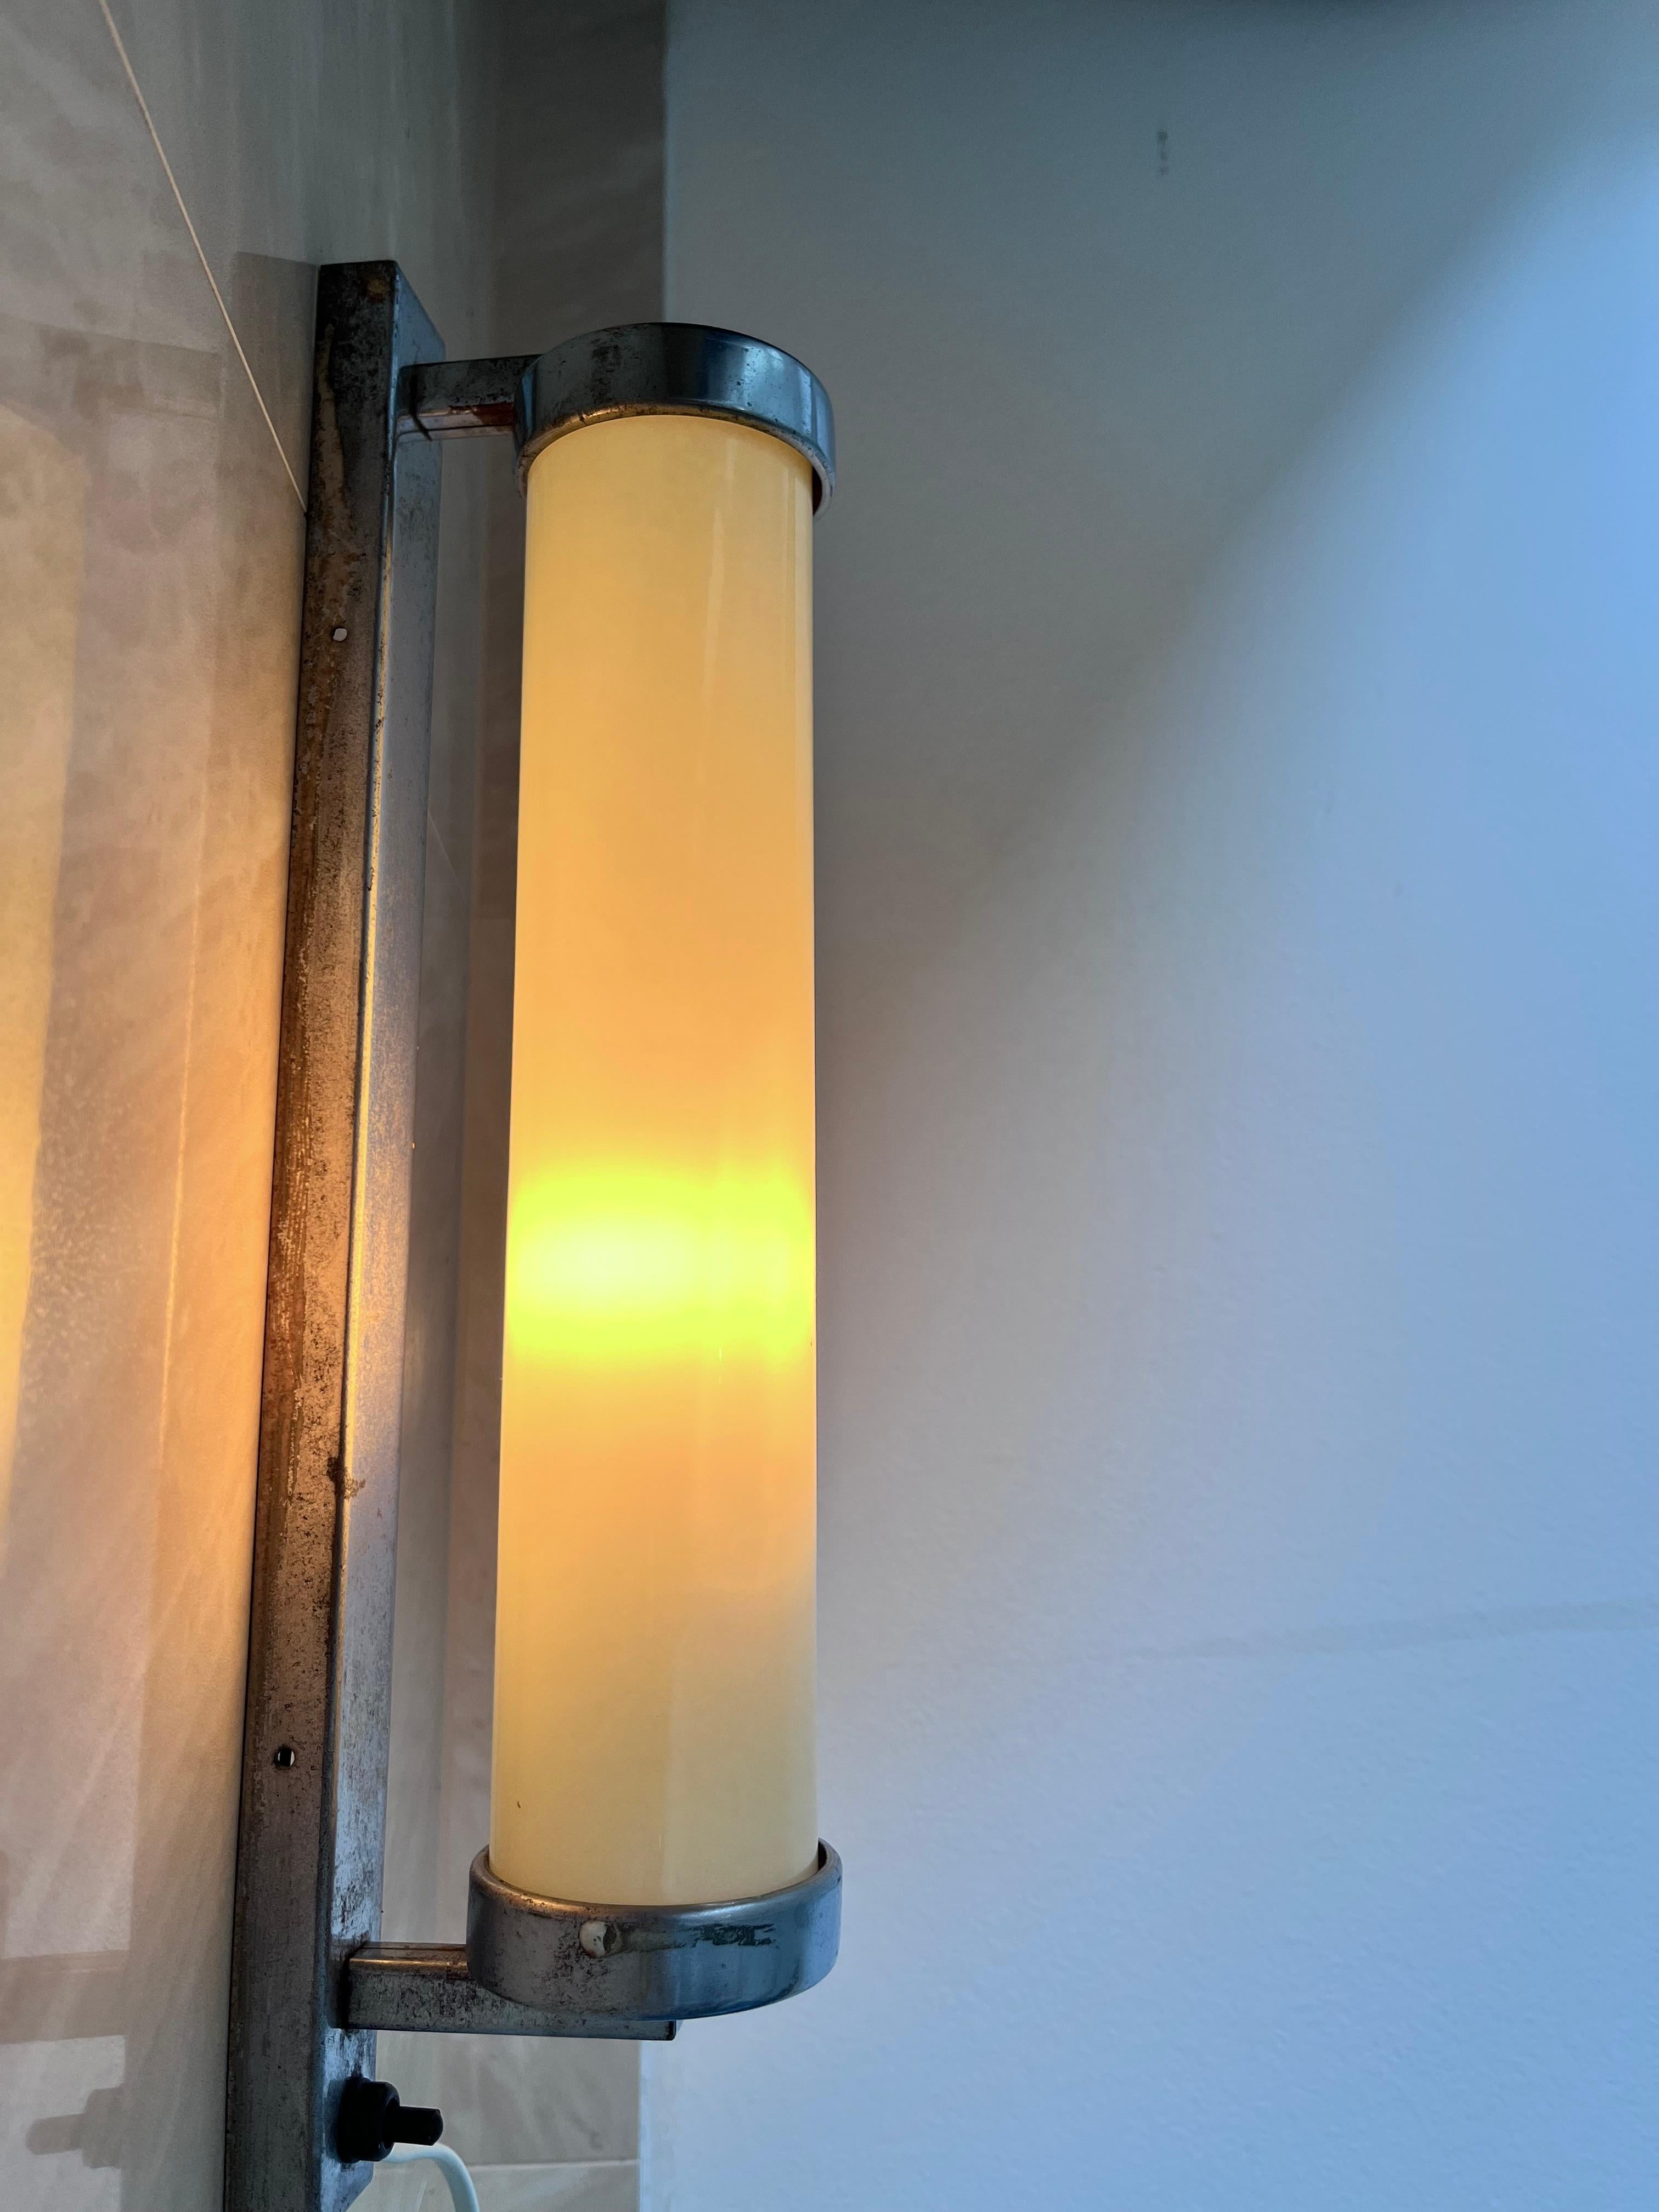 - 1930S, Czechoslovakia
- polished, new electricity
- patina(see the details)
- US wiring compatible
- one bulb any wattage 
- can be used bot vertically and horizontally on wall
jr